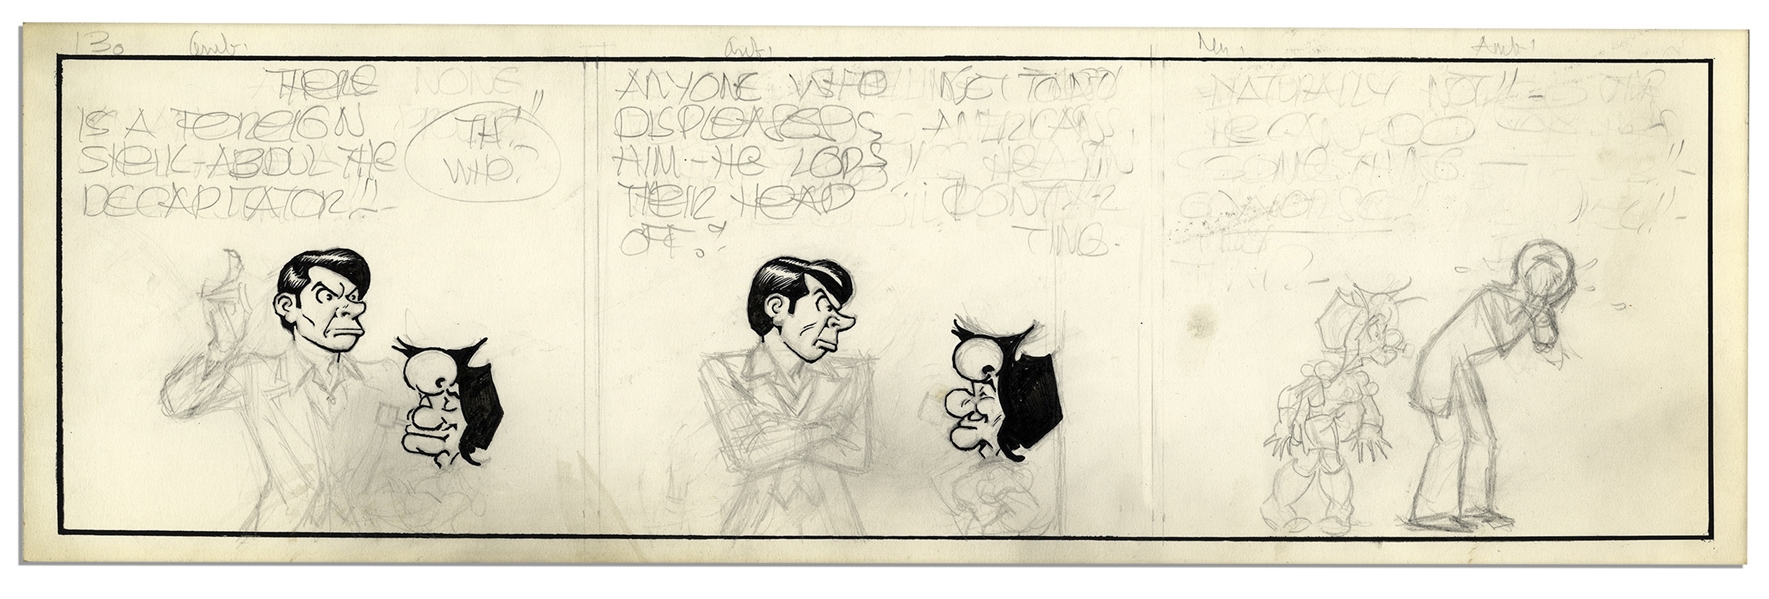 ''Li'l Abner'' Unfinished Comic Strip by Al Capp in Pencil & Ink -- Undated & Featuring Mammy Yokum With Sketch of Li'l Abner to Verso -- 19.75'' x 6.25'' -- Very Good -- From Al Capp Estate